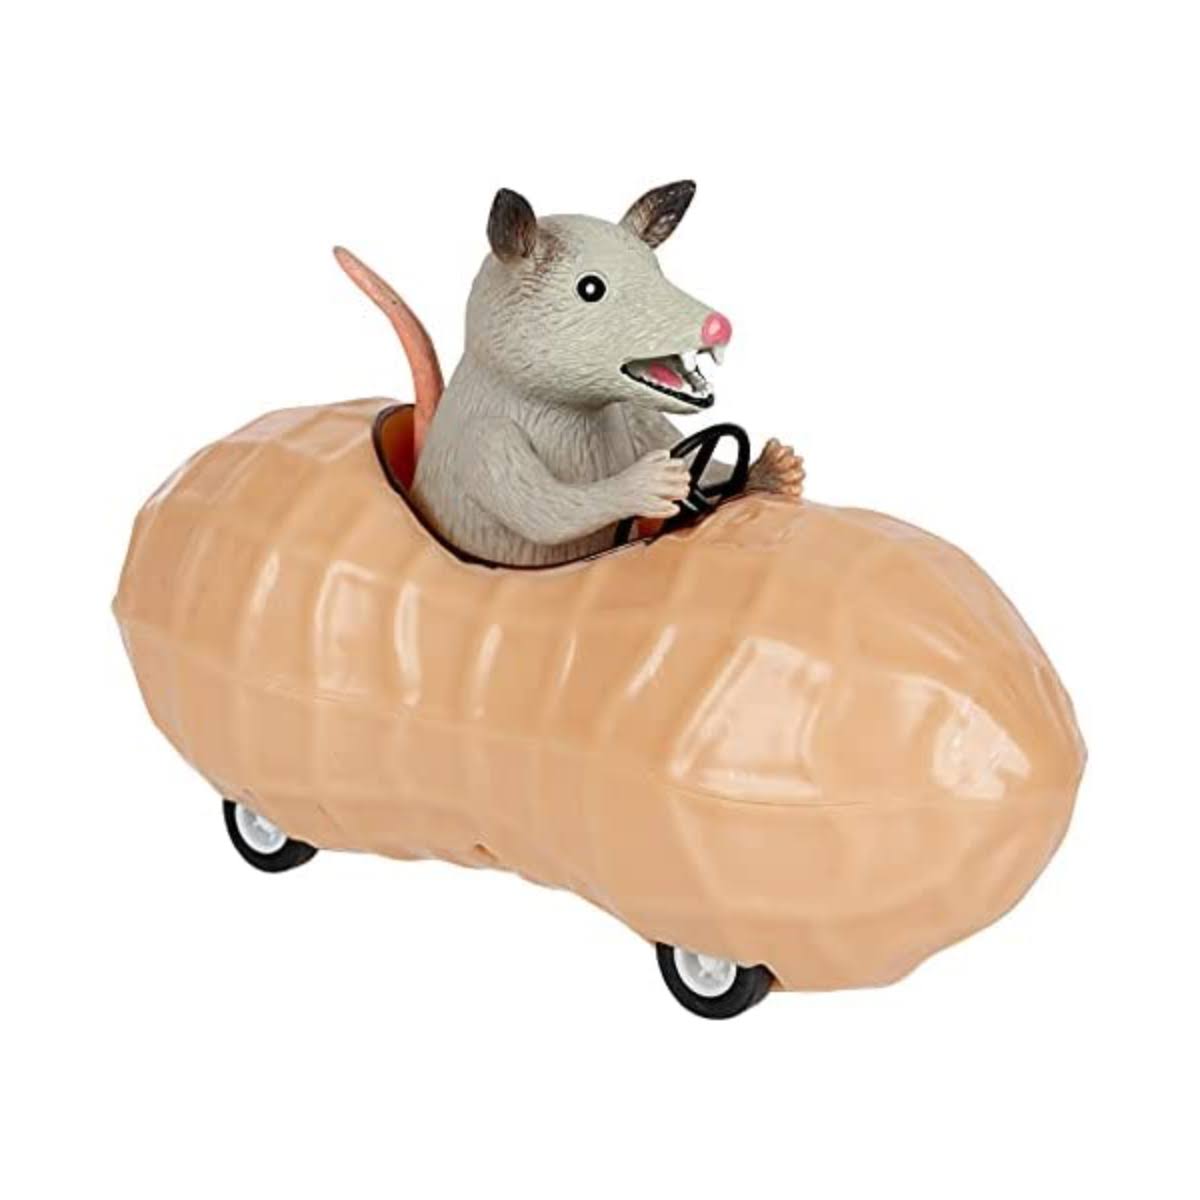 Mcphee Archie Possum in a Peanut Pull Back Toy Car (12967)